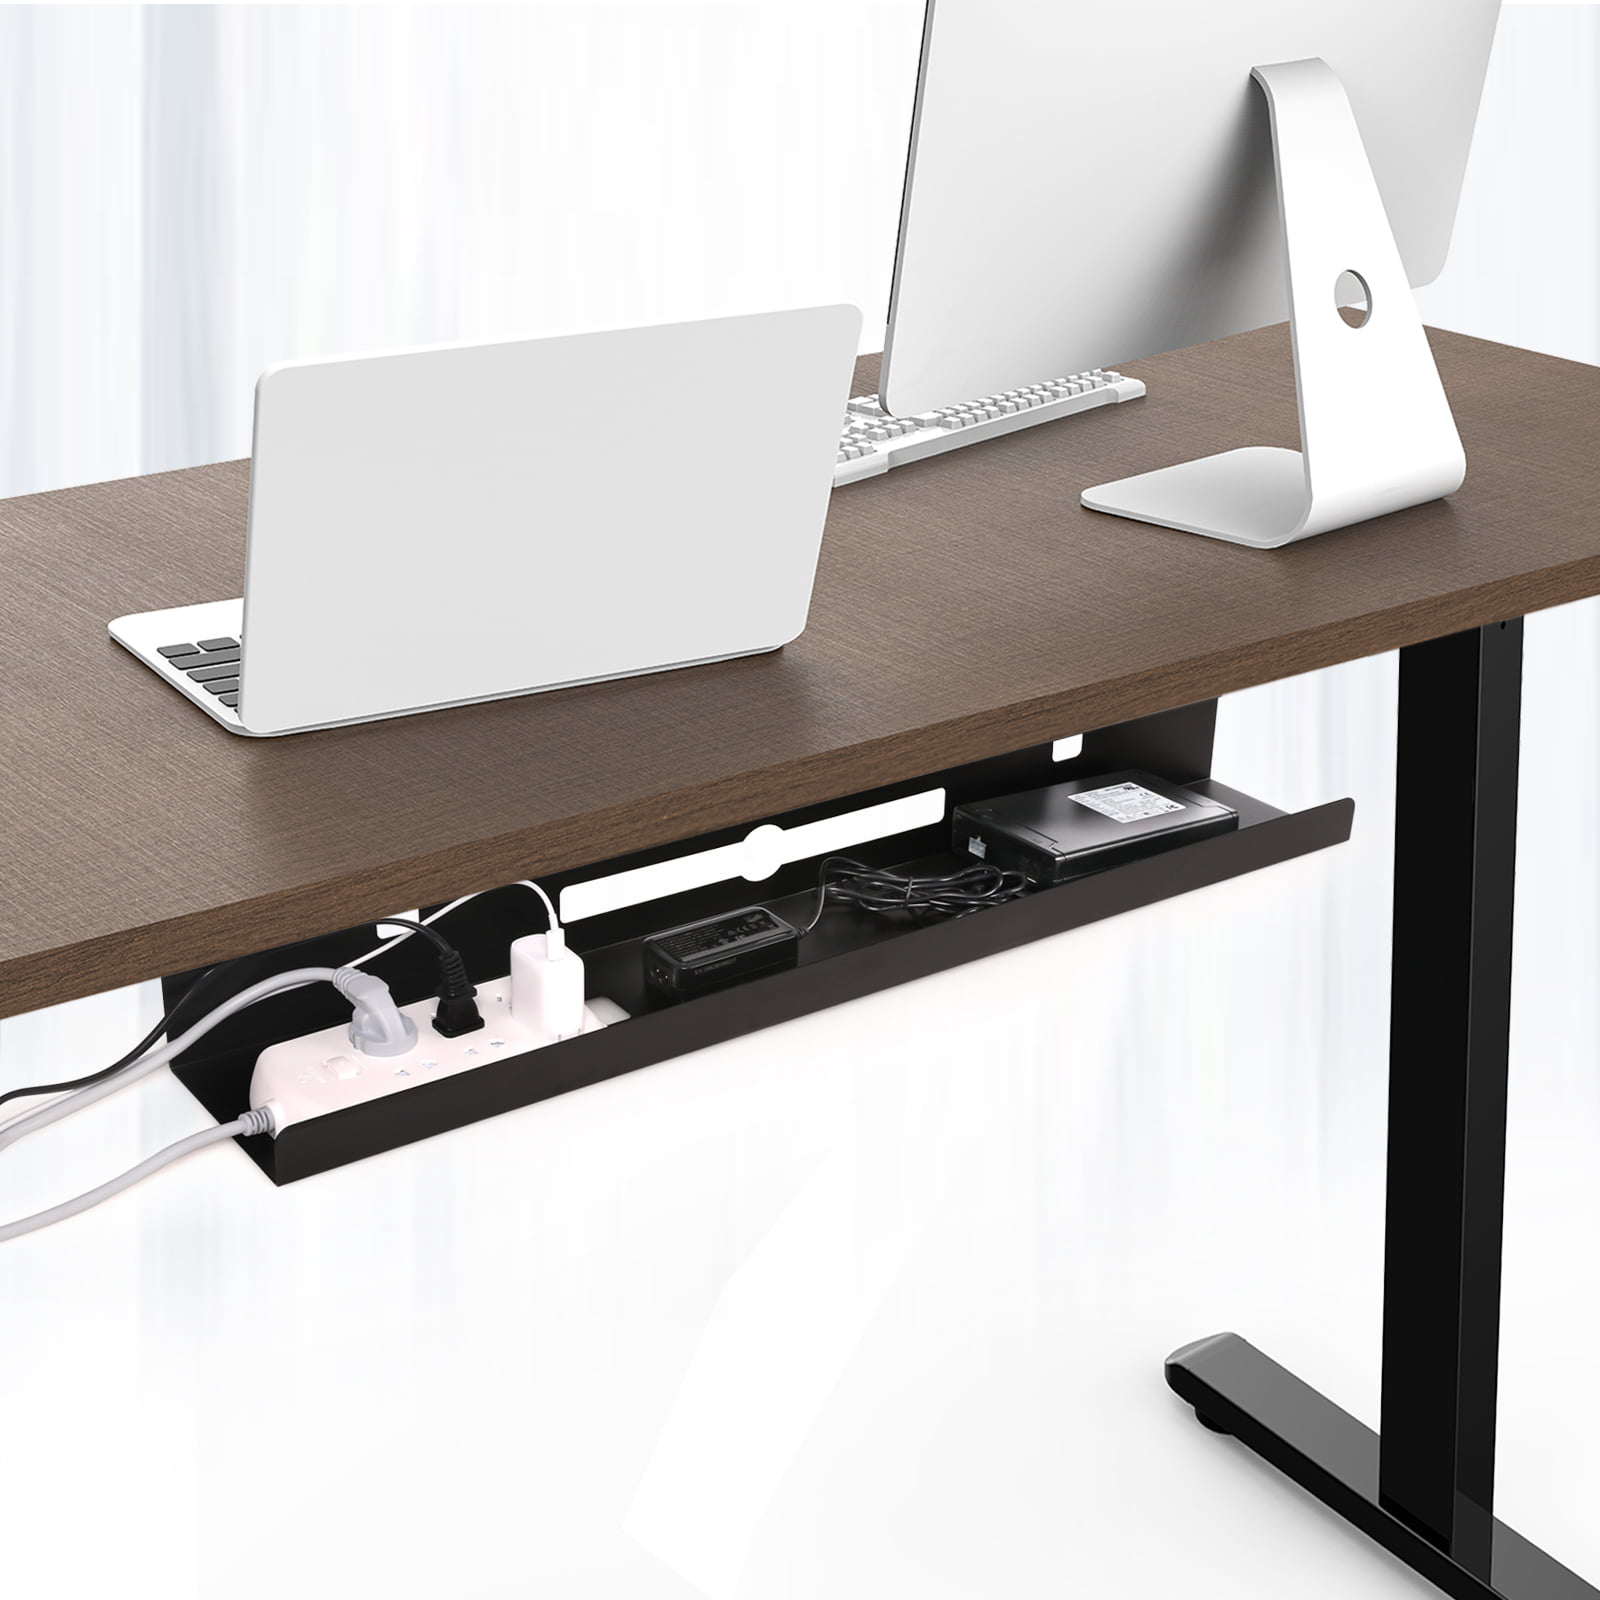 Cable Management Tray, Under-Desk/On-Wall/Side-of-Desk – Quality